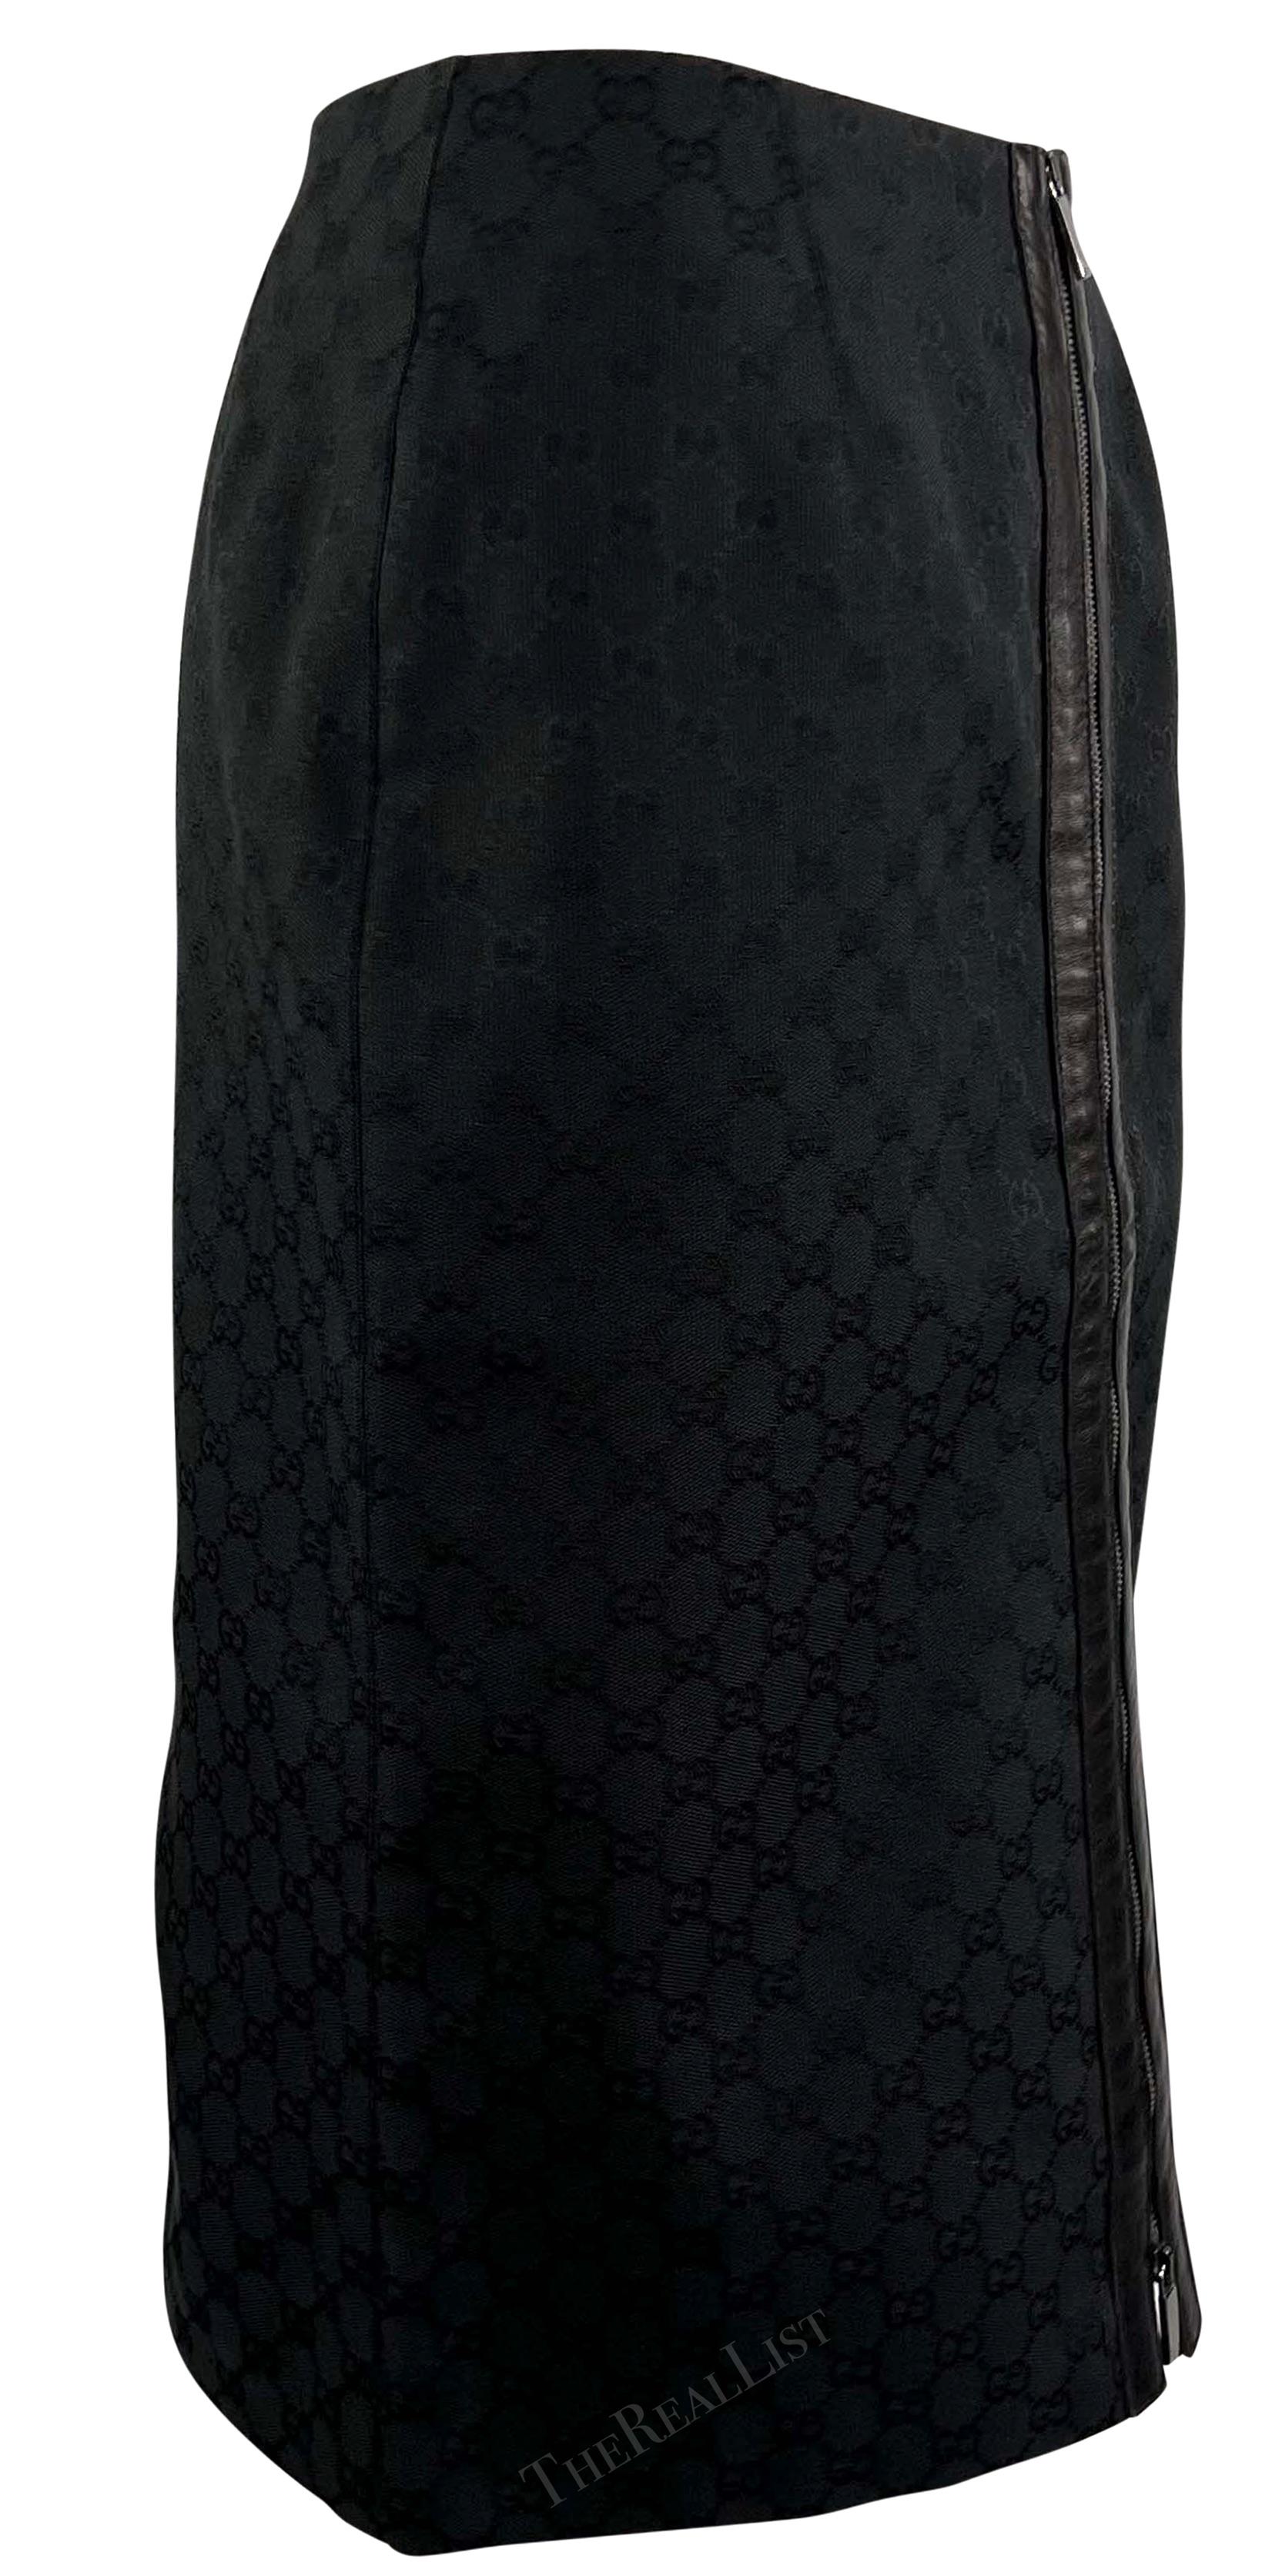 F/W 2000 Gucci by Tom Ford Black GG Monogram Zipper Pencil Skirt For Sale 2